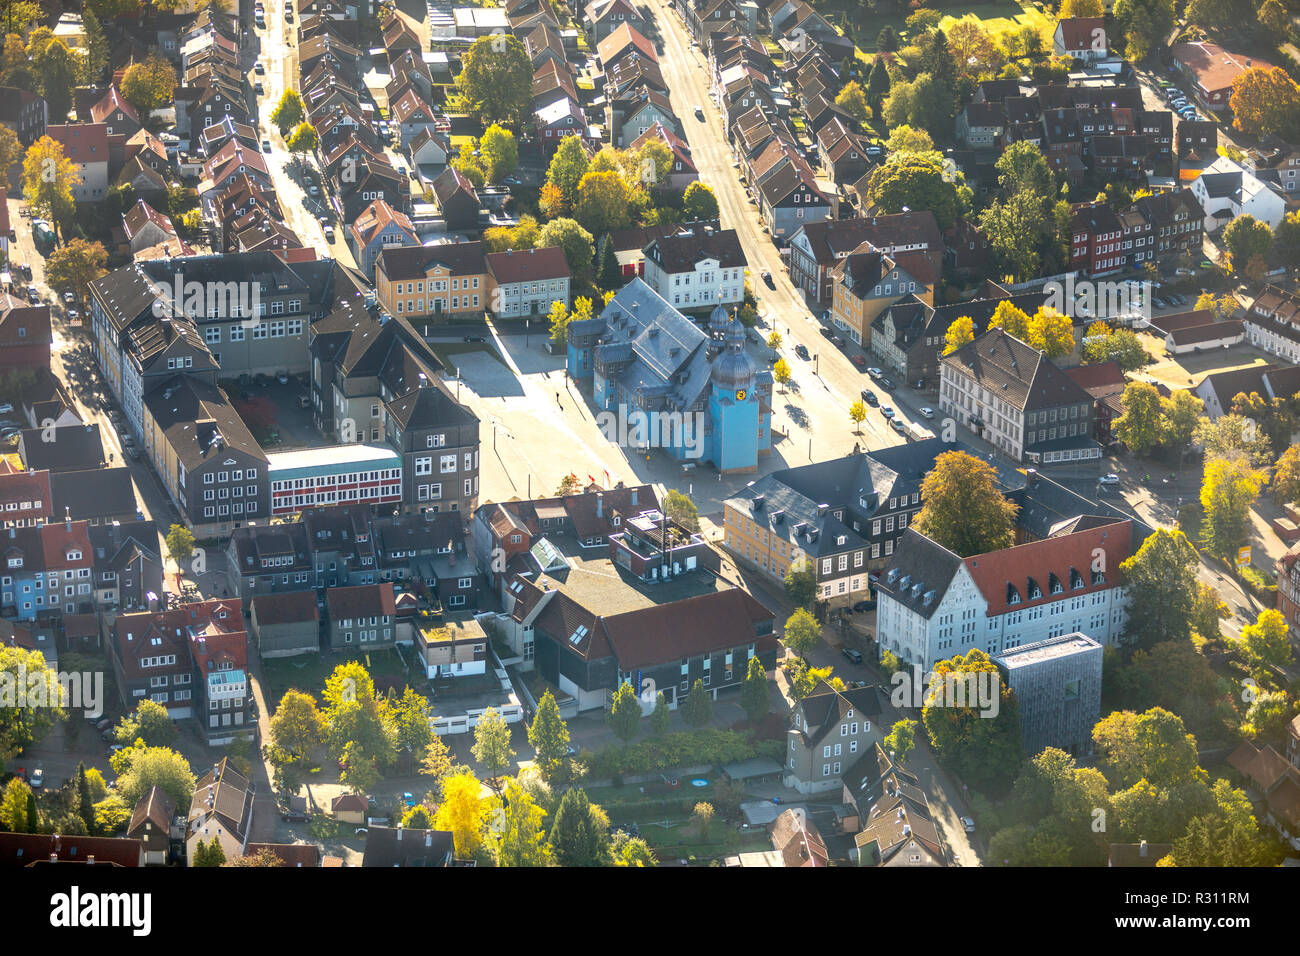 Aerial view, Clausthal University of Technology, Adolph-Roemer-Straße, Evangelical Lutheran Market Church of the Holy Spirit, An der Marktkirche, Clau Stock Photo